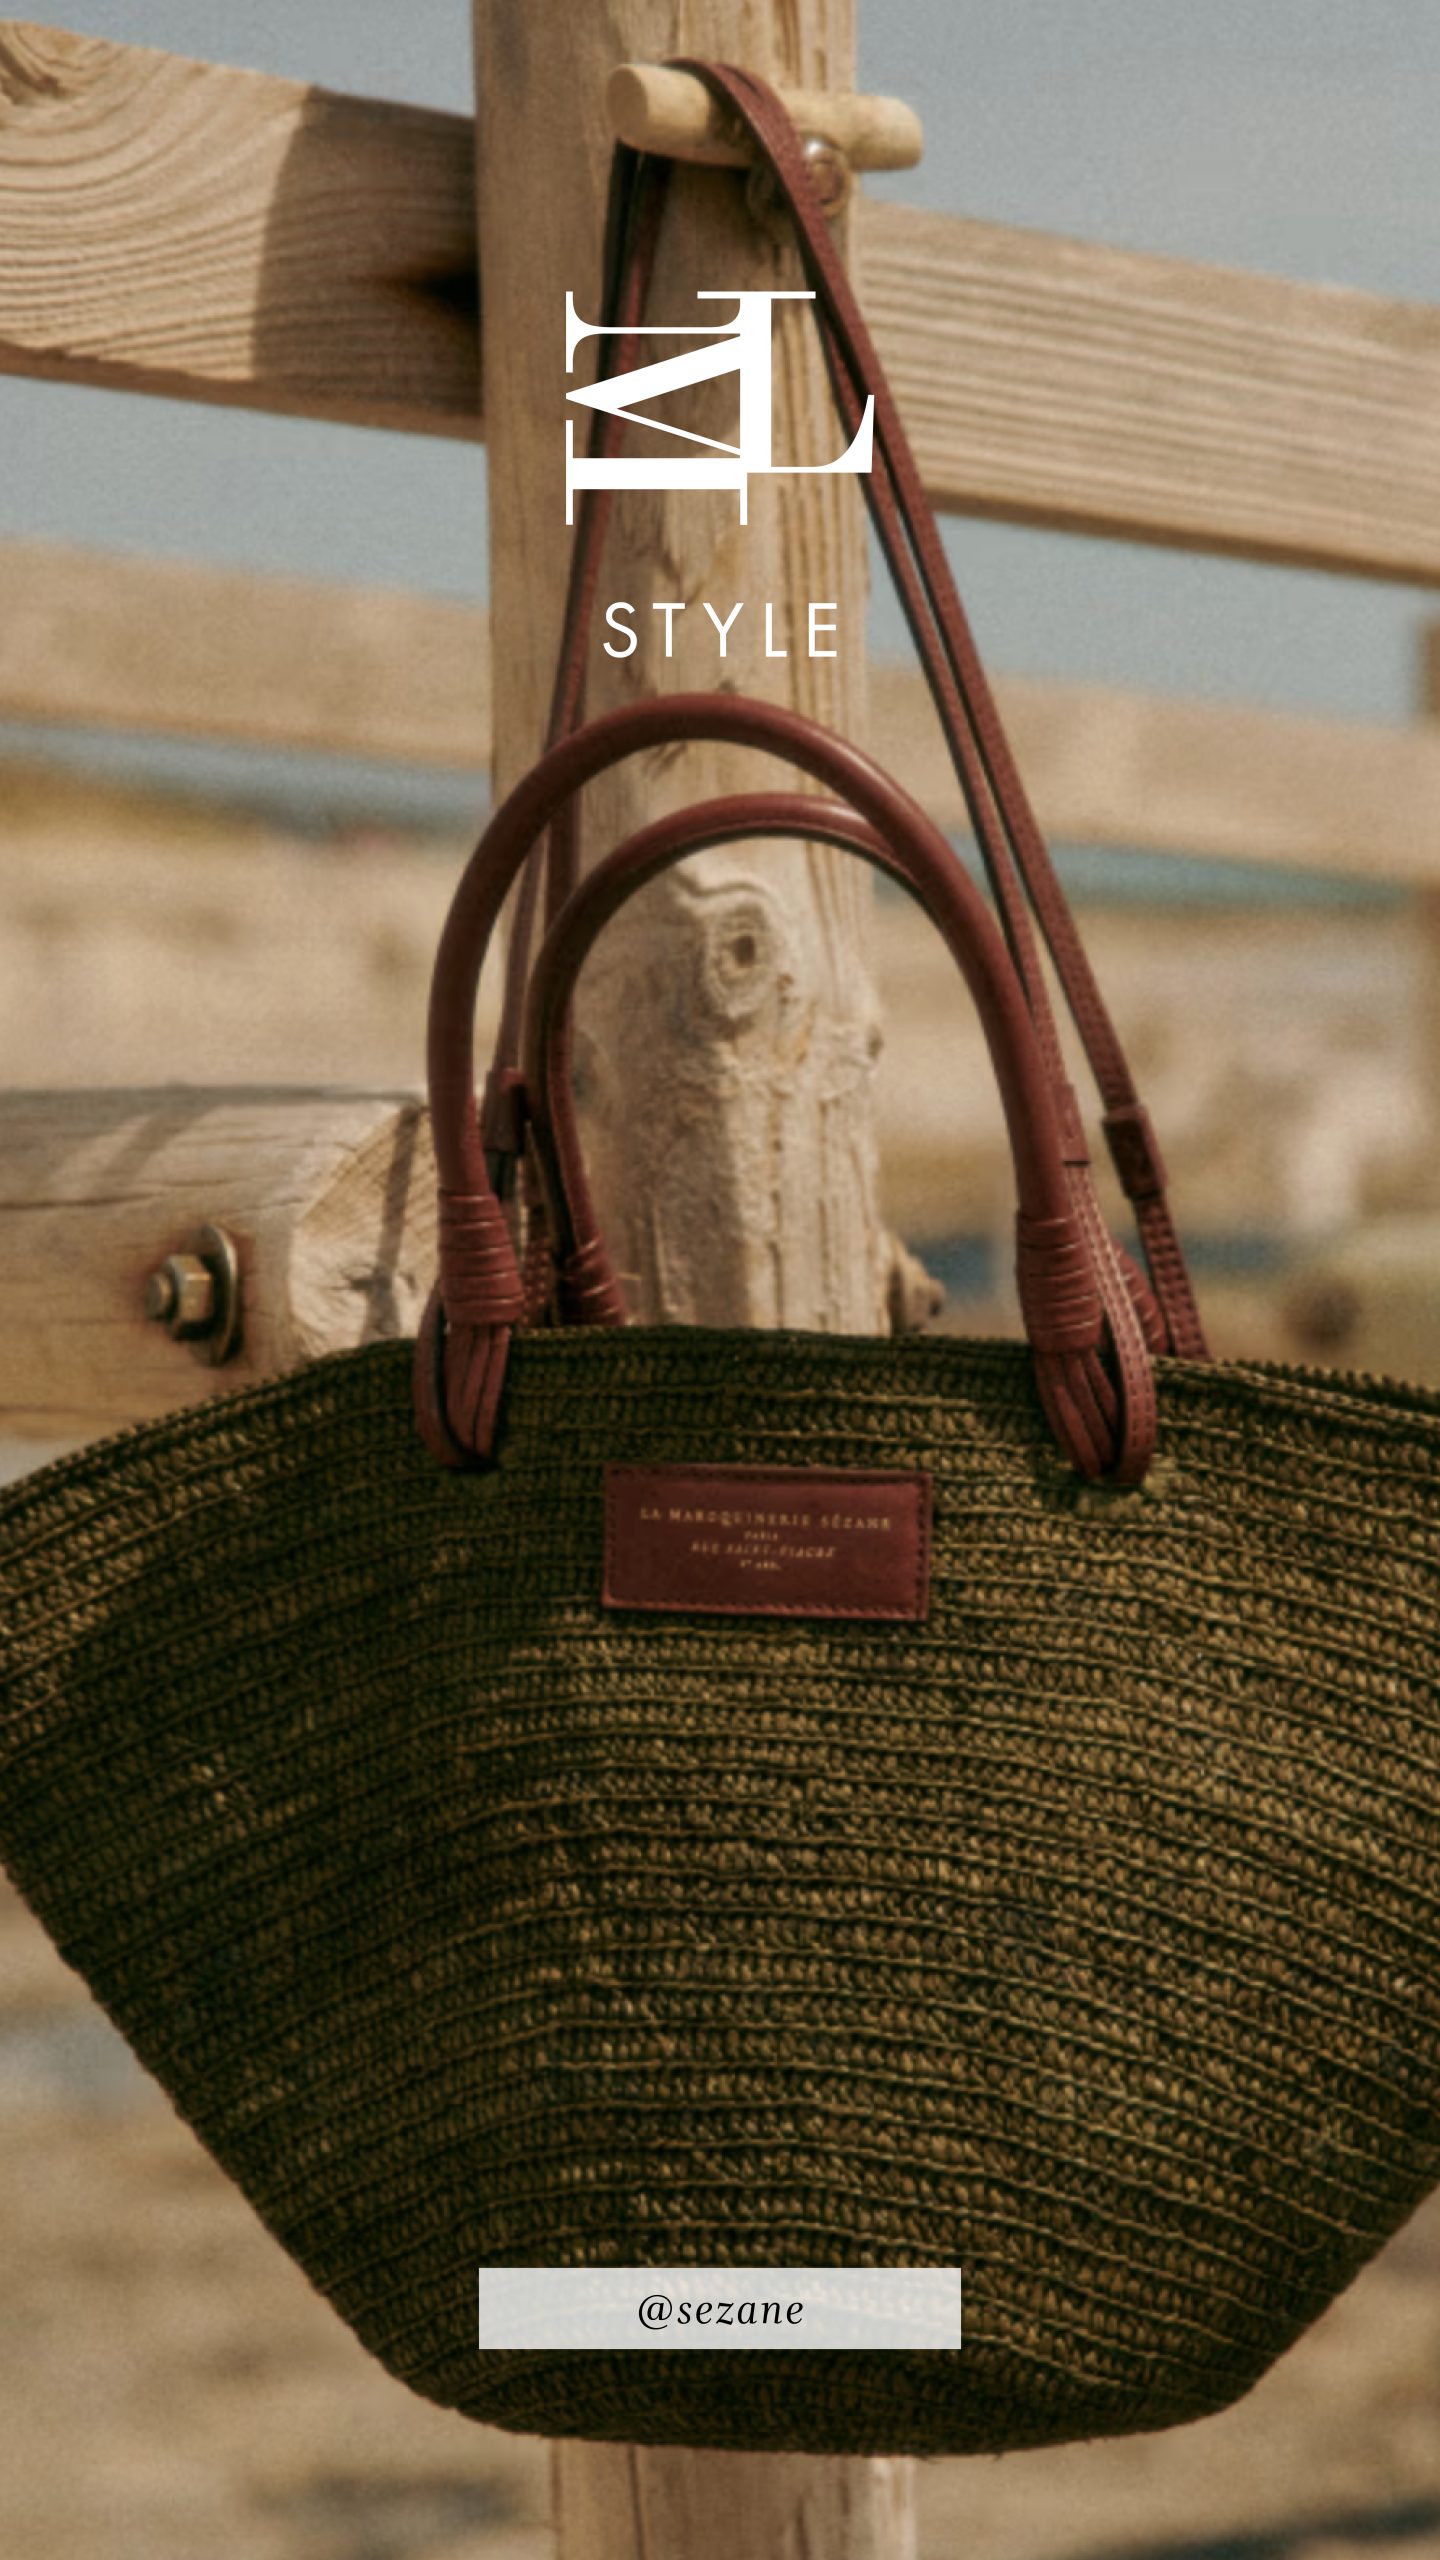 ML Style: In the Bag